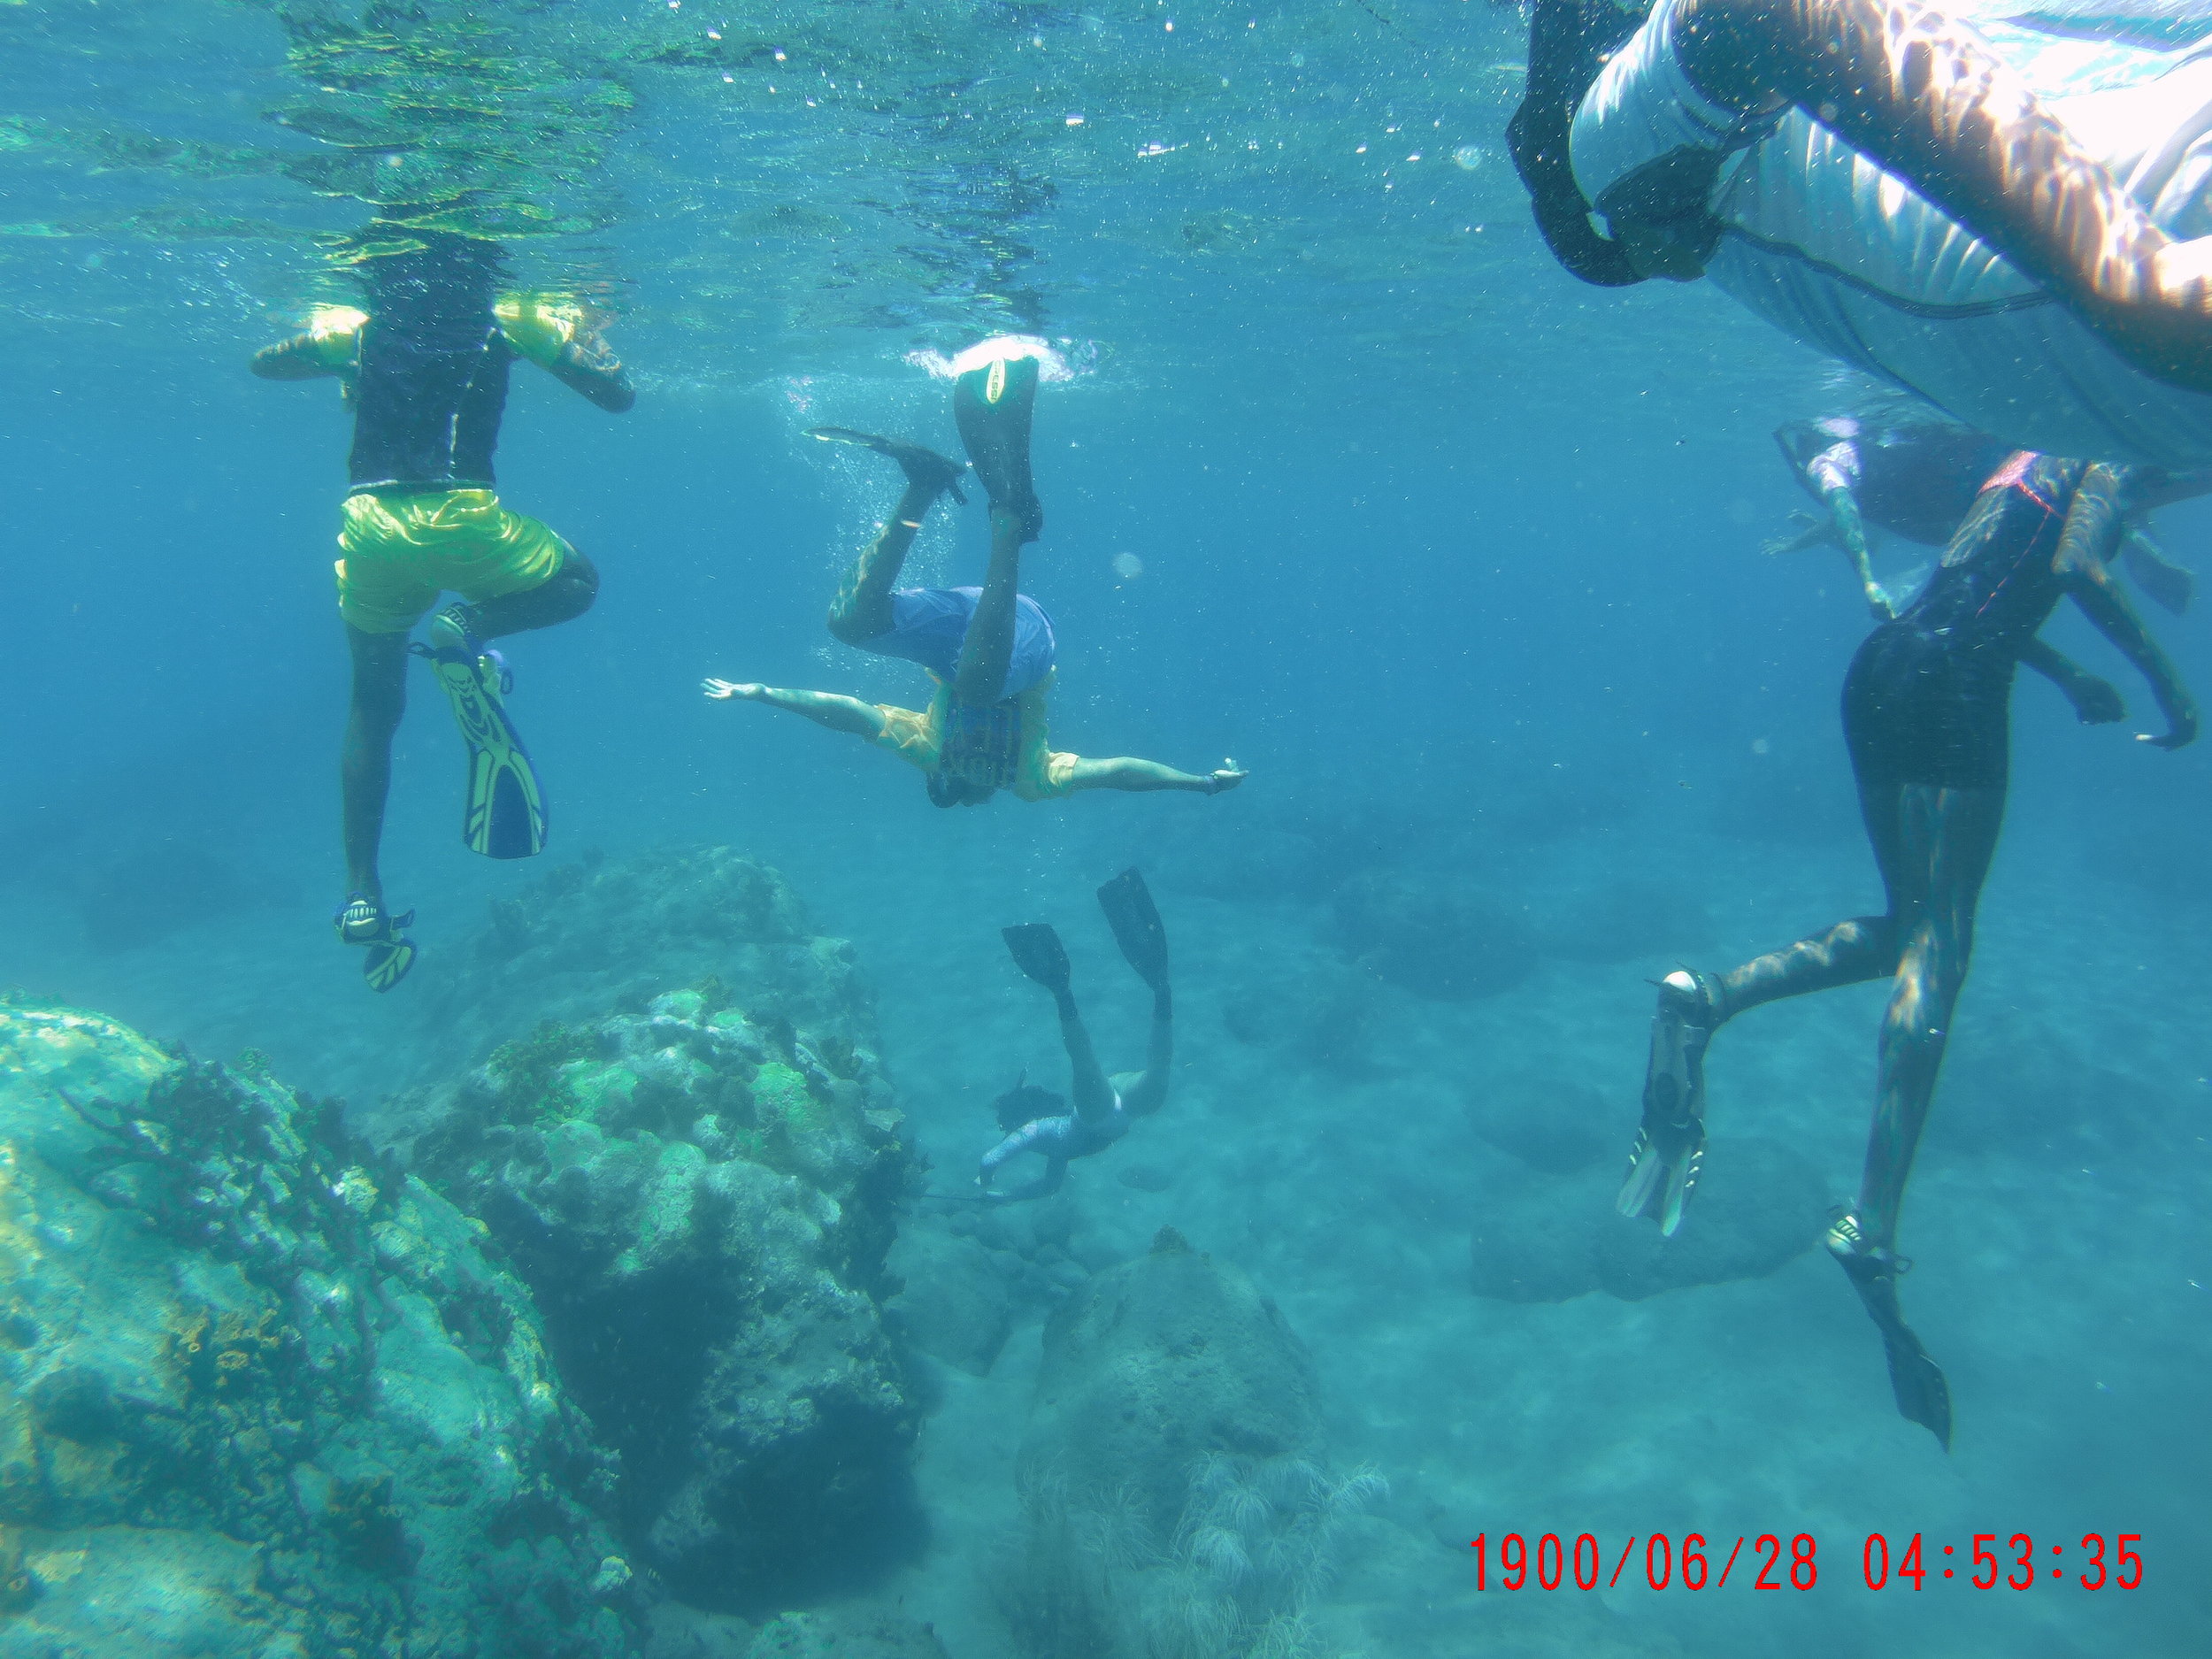 Snorkelling over the Little Bay reefs